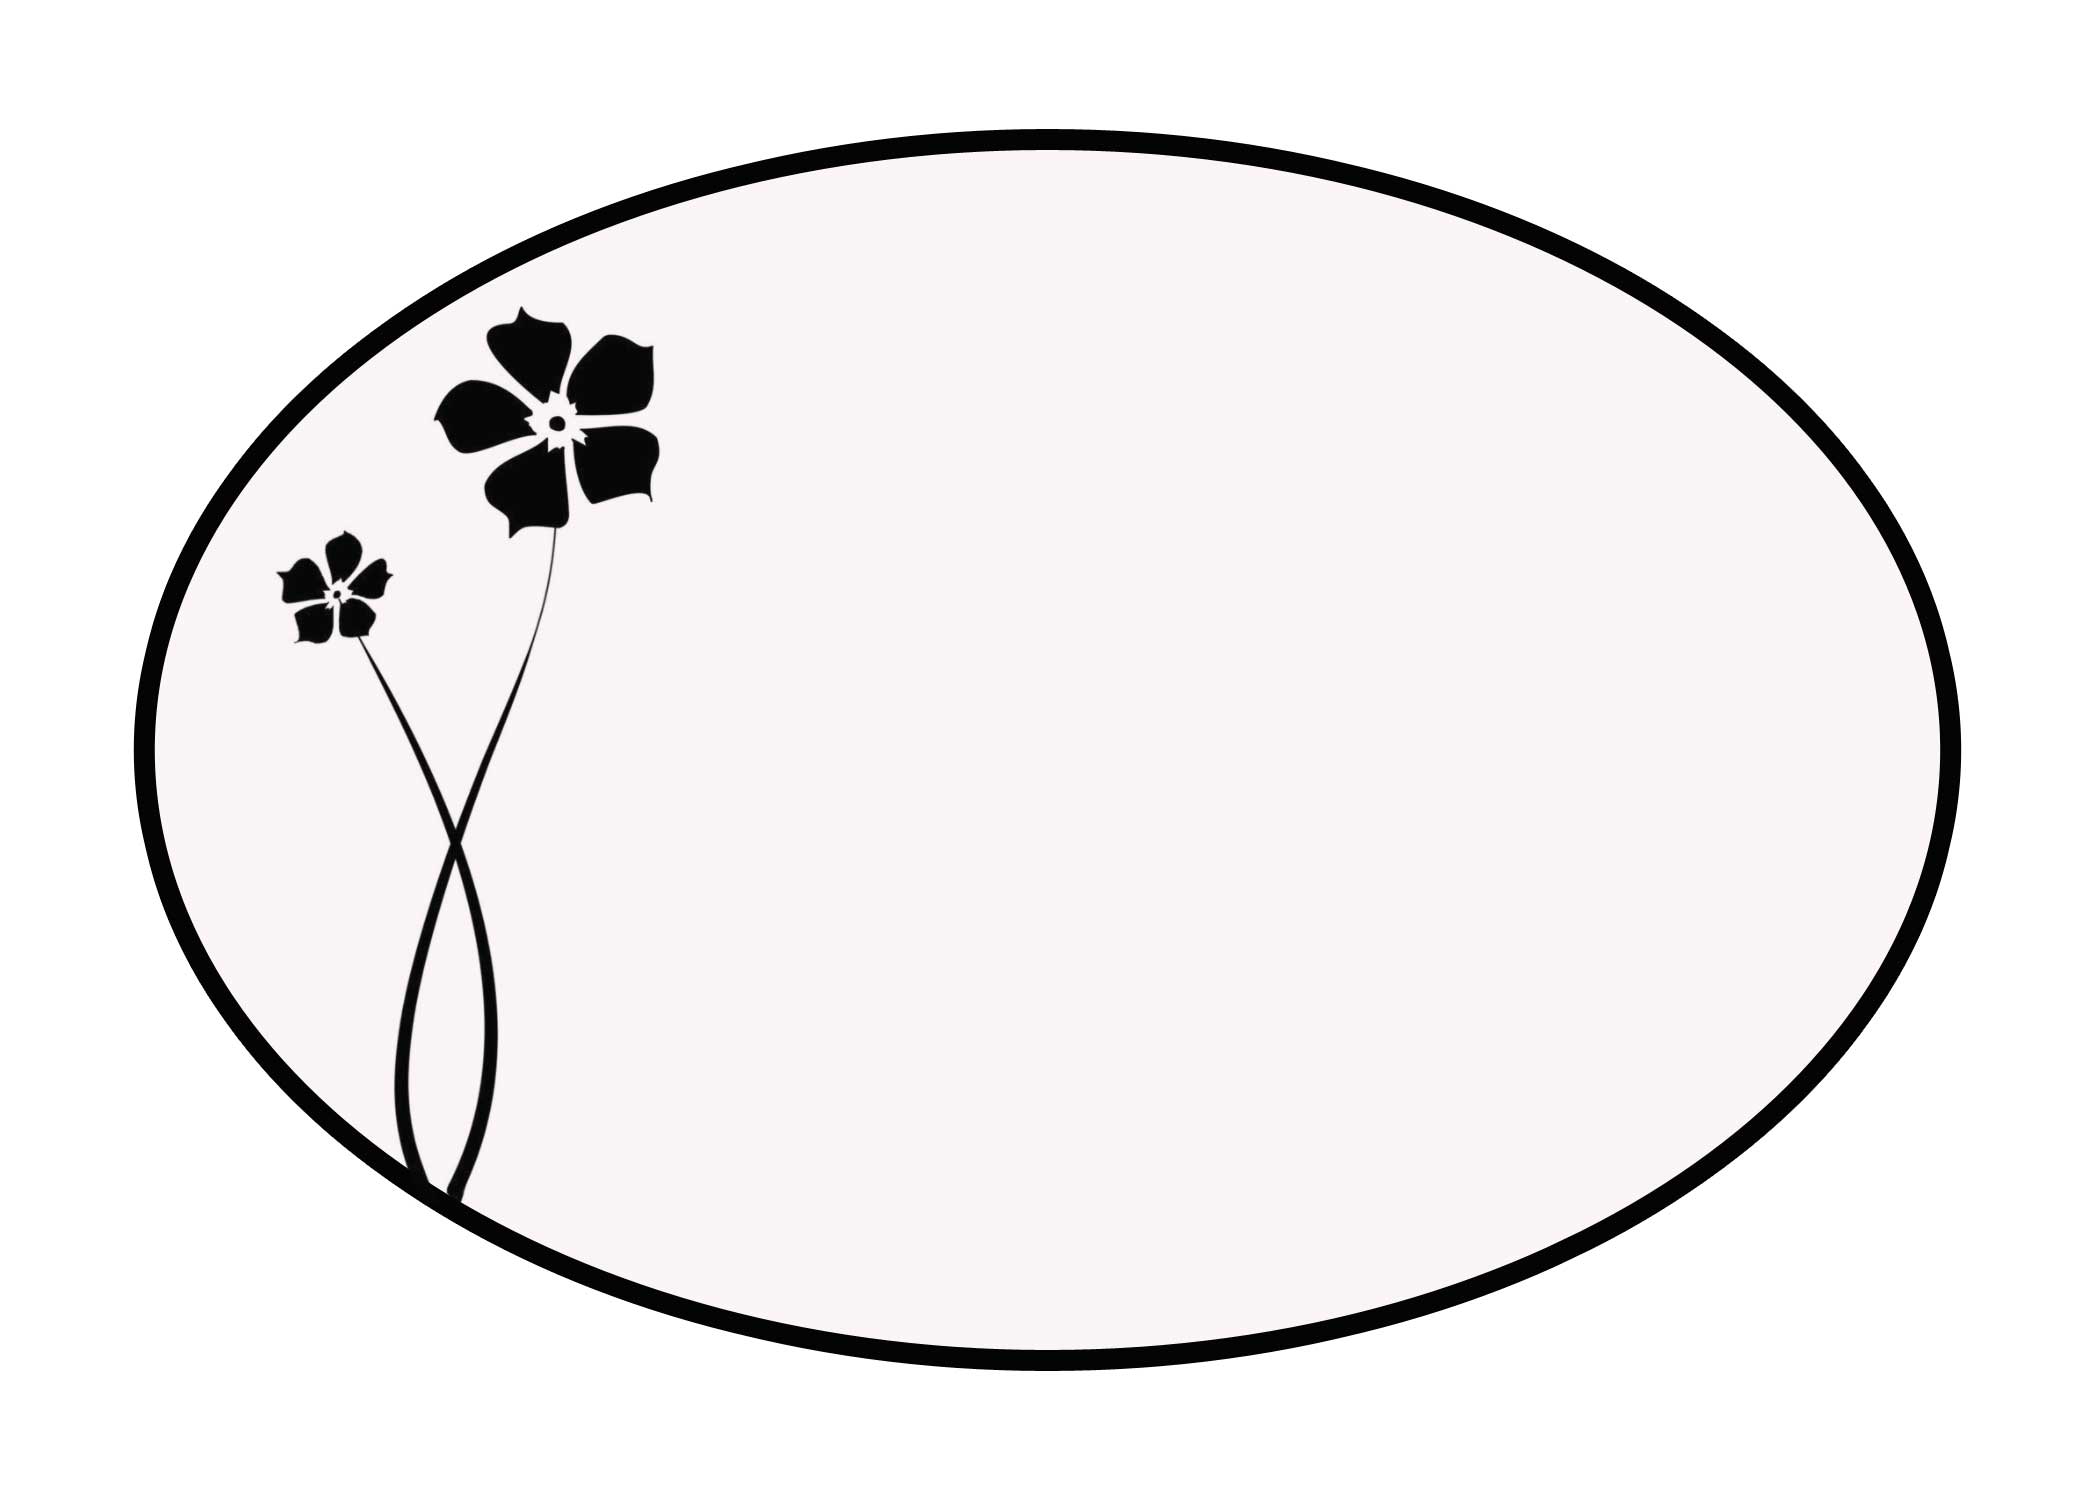 Large Oval Template ClipArt Best